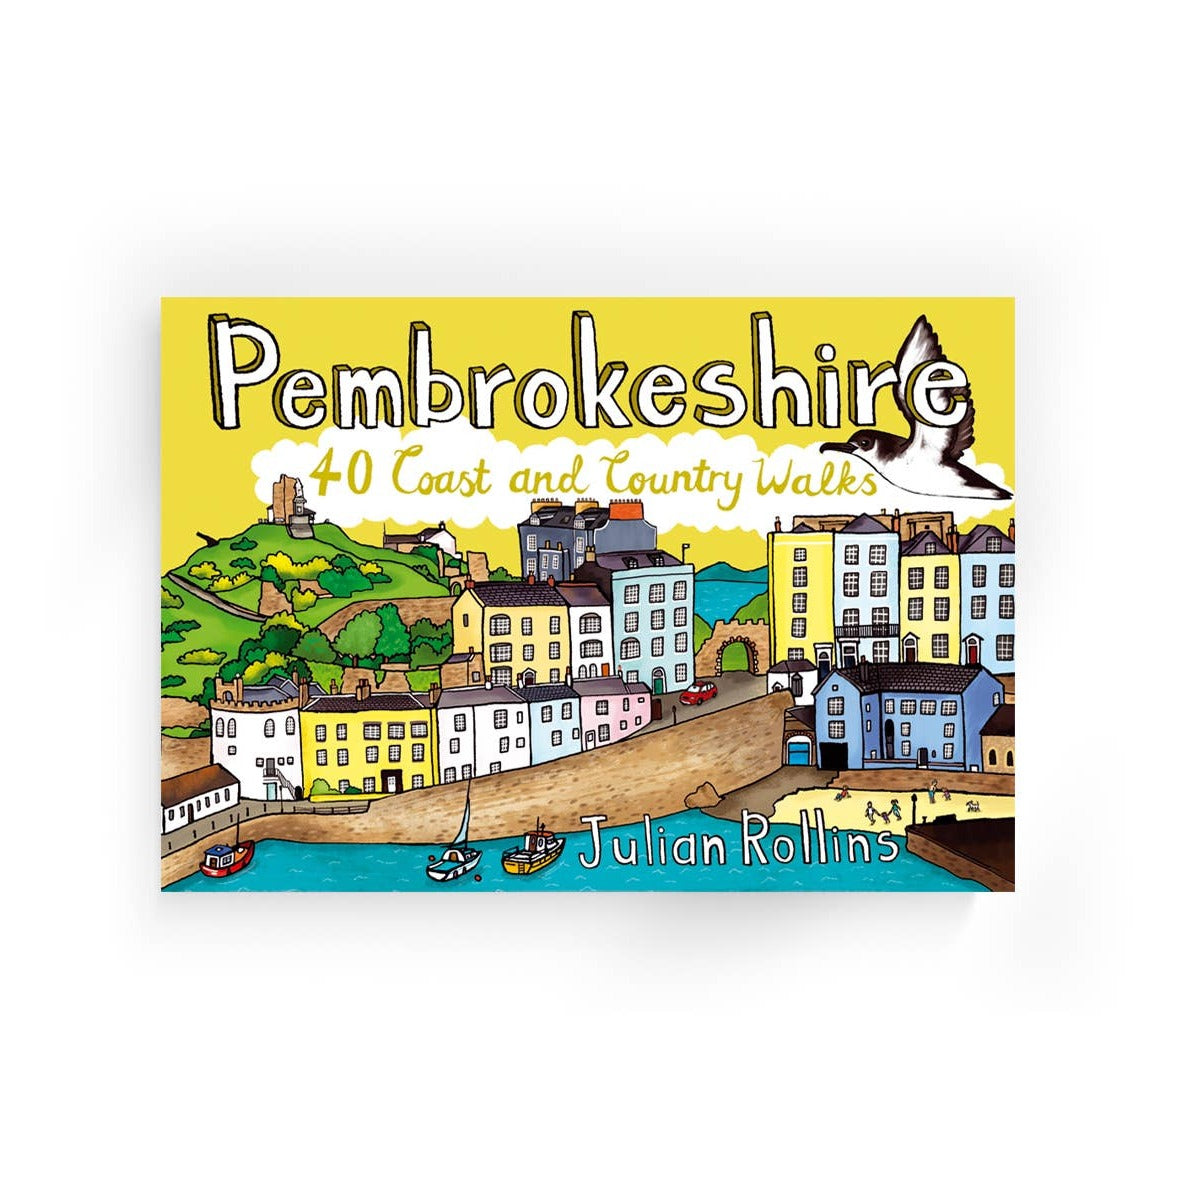 Pembrokeshire - 40 Coast and Country Walks Pocket Sized Guide Book